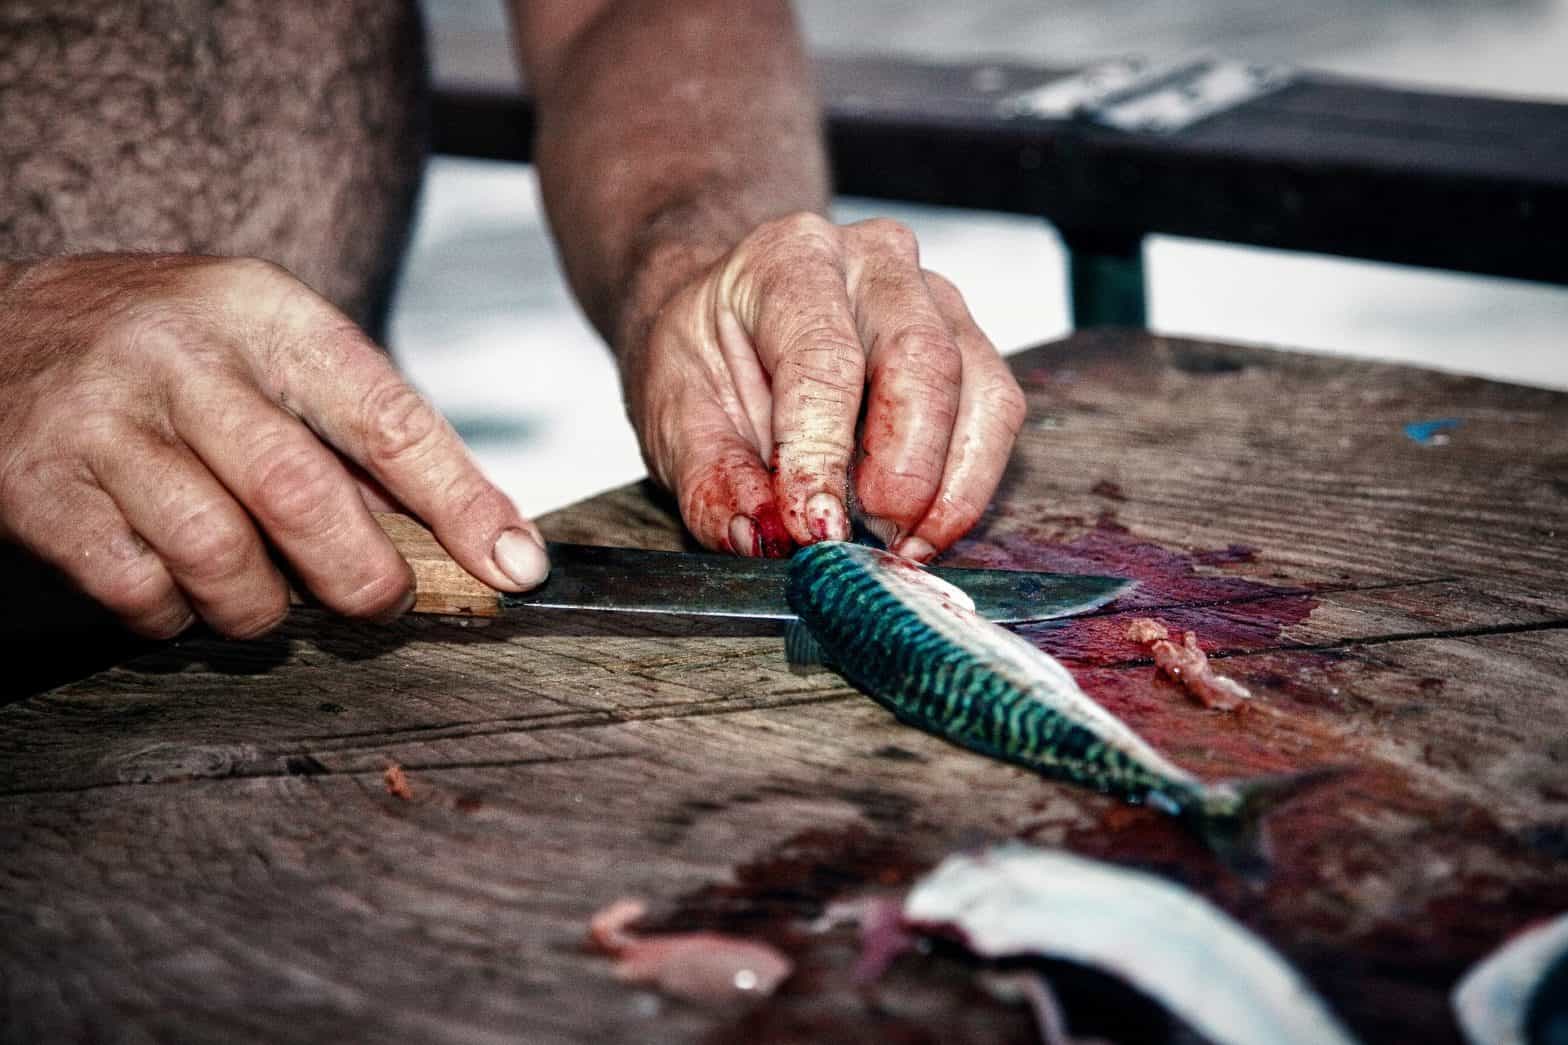 Fisherman holding a knife and gutting the fish